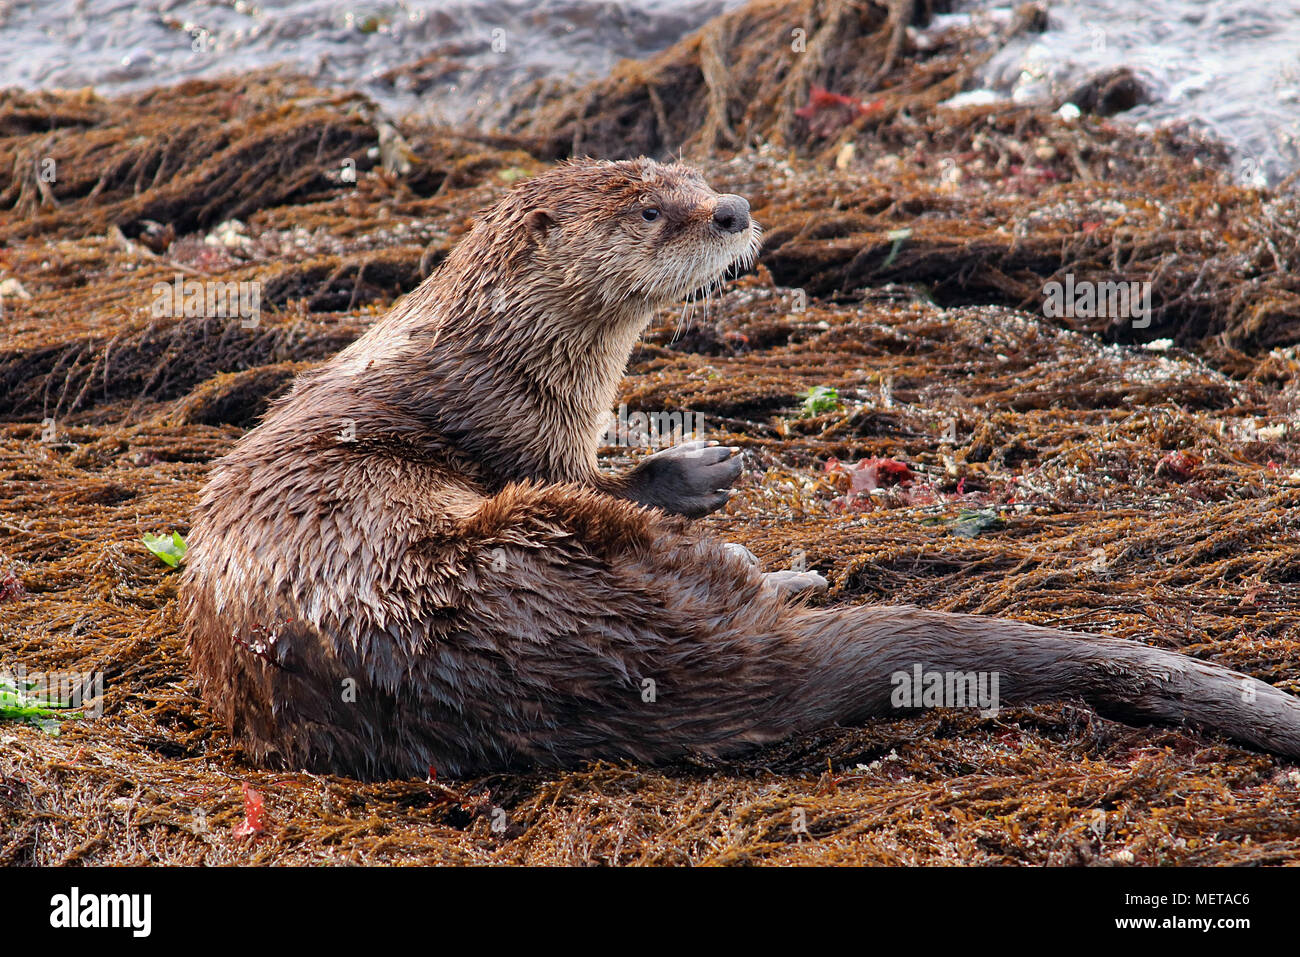 Wild River Otter (Lontra canadensis) sitting in kelp on a neach in Nanaimo on Vancouver Island on the Canadian West coast. Stock Photo